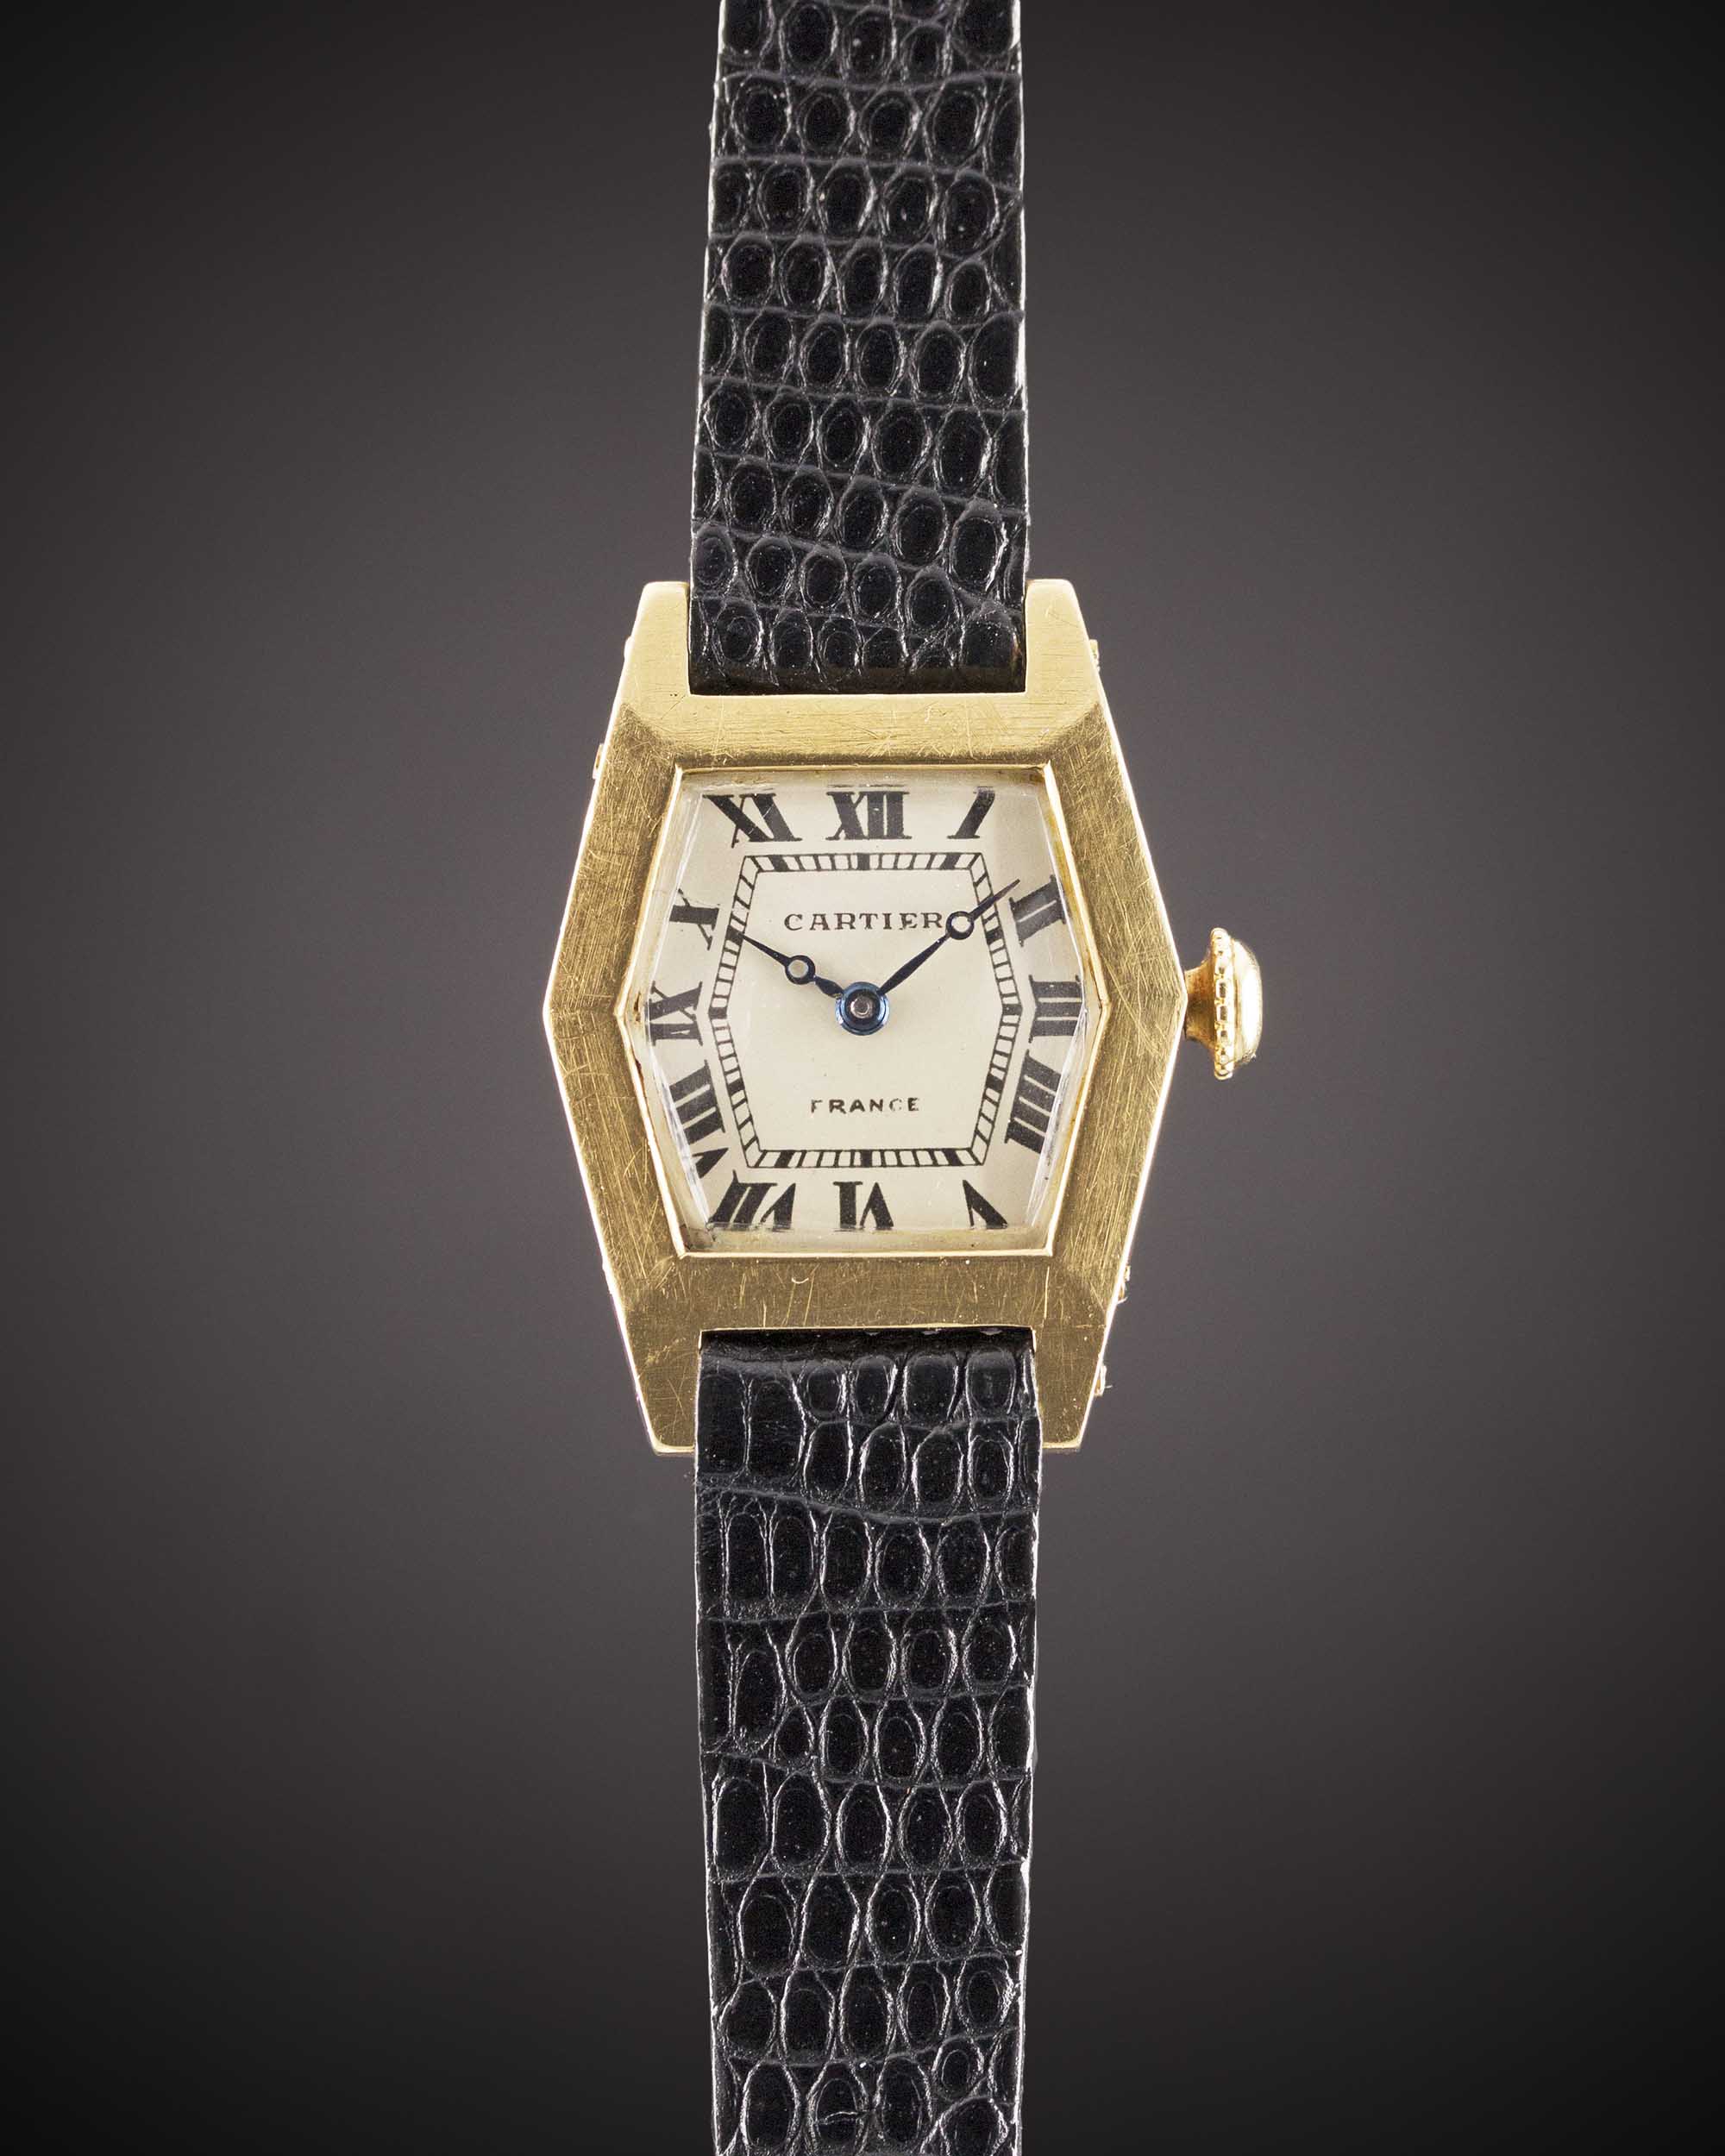 A RARE LADIES 18K SOLID GOLD CARTIER FRANCE WRIST WATCH CIRCA 1940